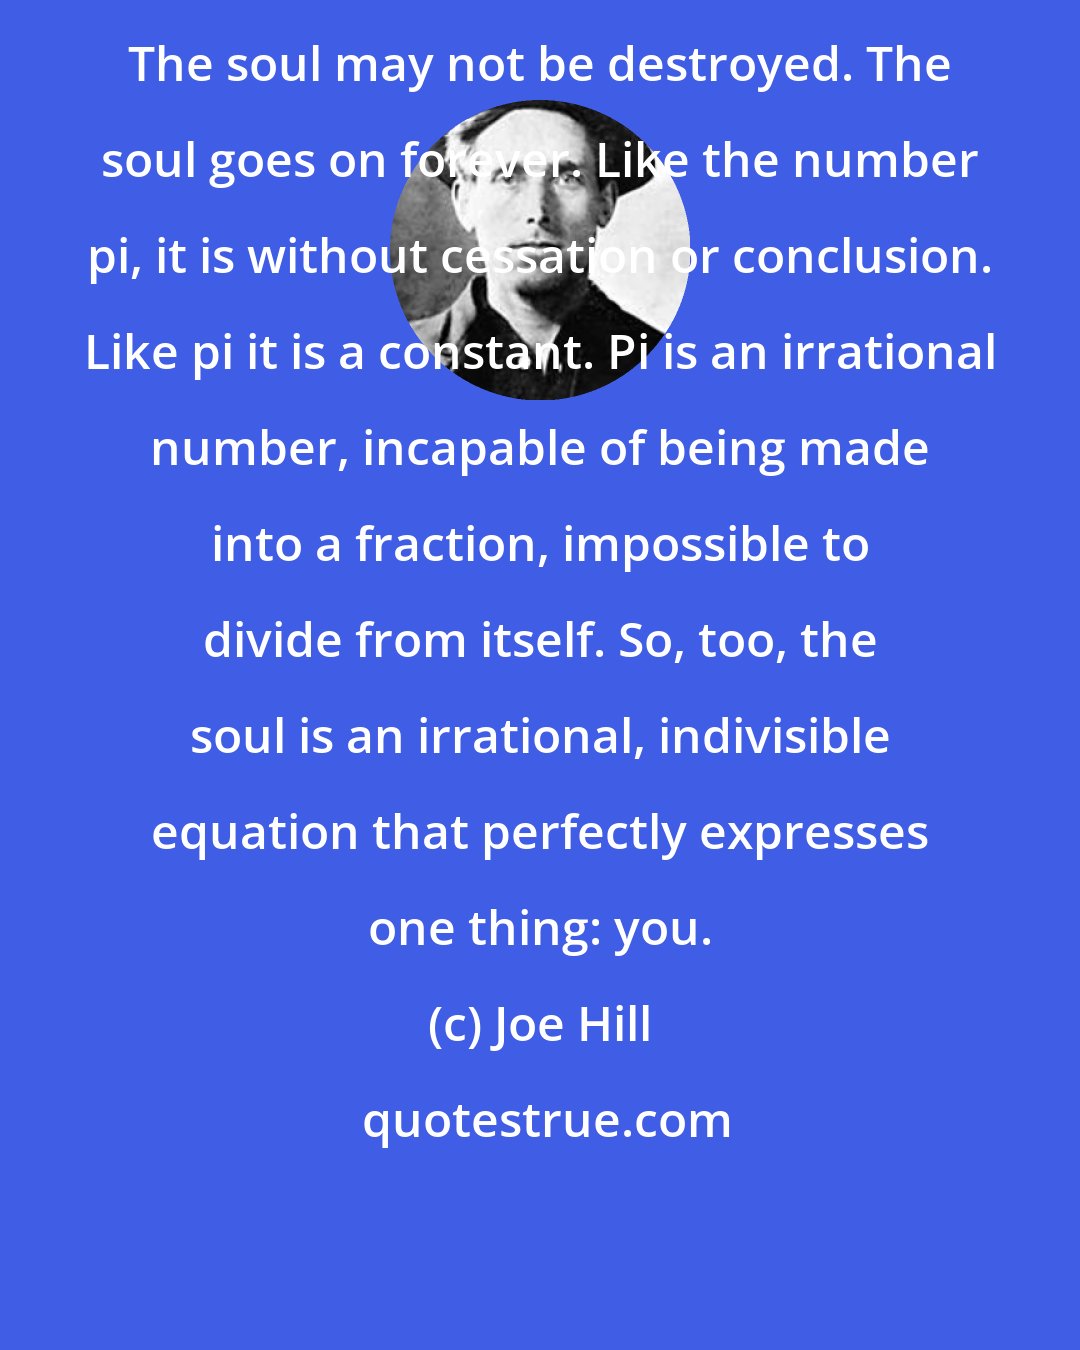 Joe Hill: The soul may not be destroyed. The soul goes on forever. Like the number pi, it is without cessation or conclusion. Like pi it is a constant. Pi is an irrational number, incapable of being made into a fraction, impossible to divide from itself. So, too, the soul is an irrational, indivisible equation that perfectly expresses one thing: you.